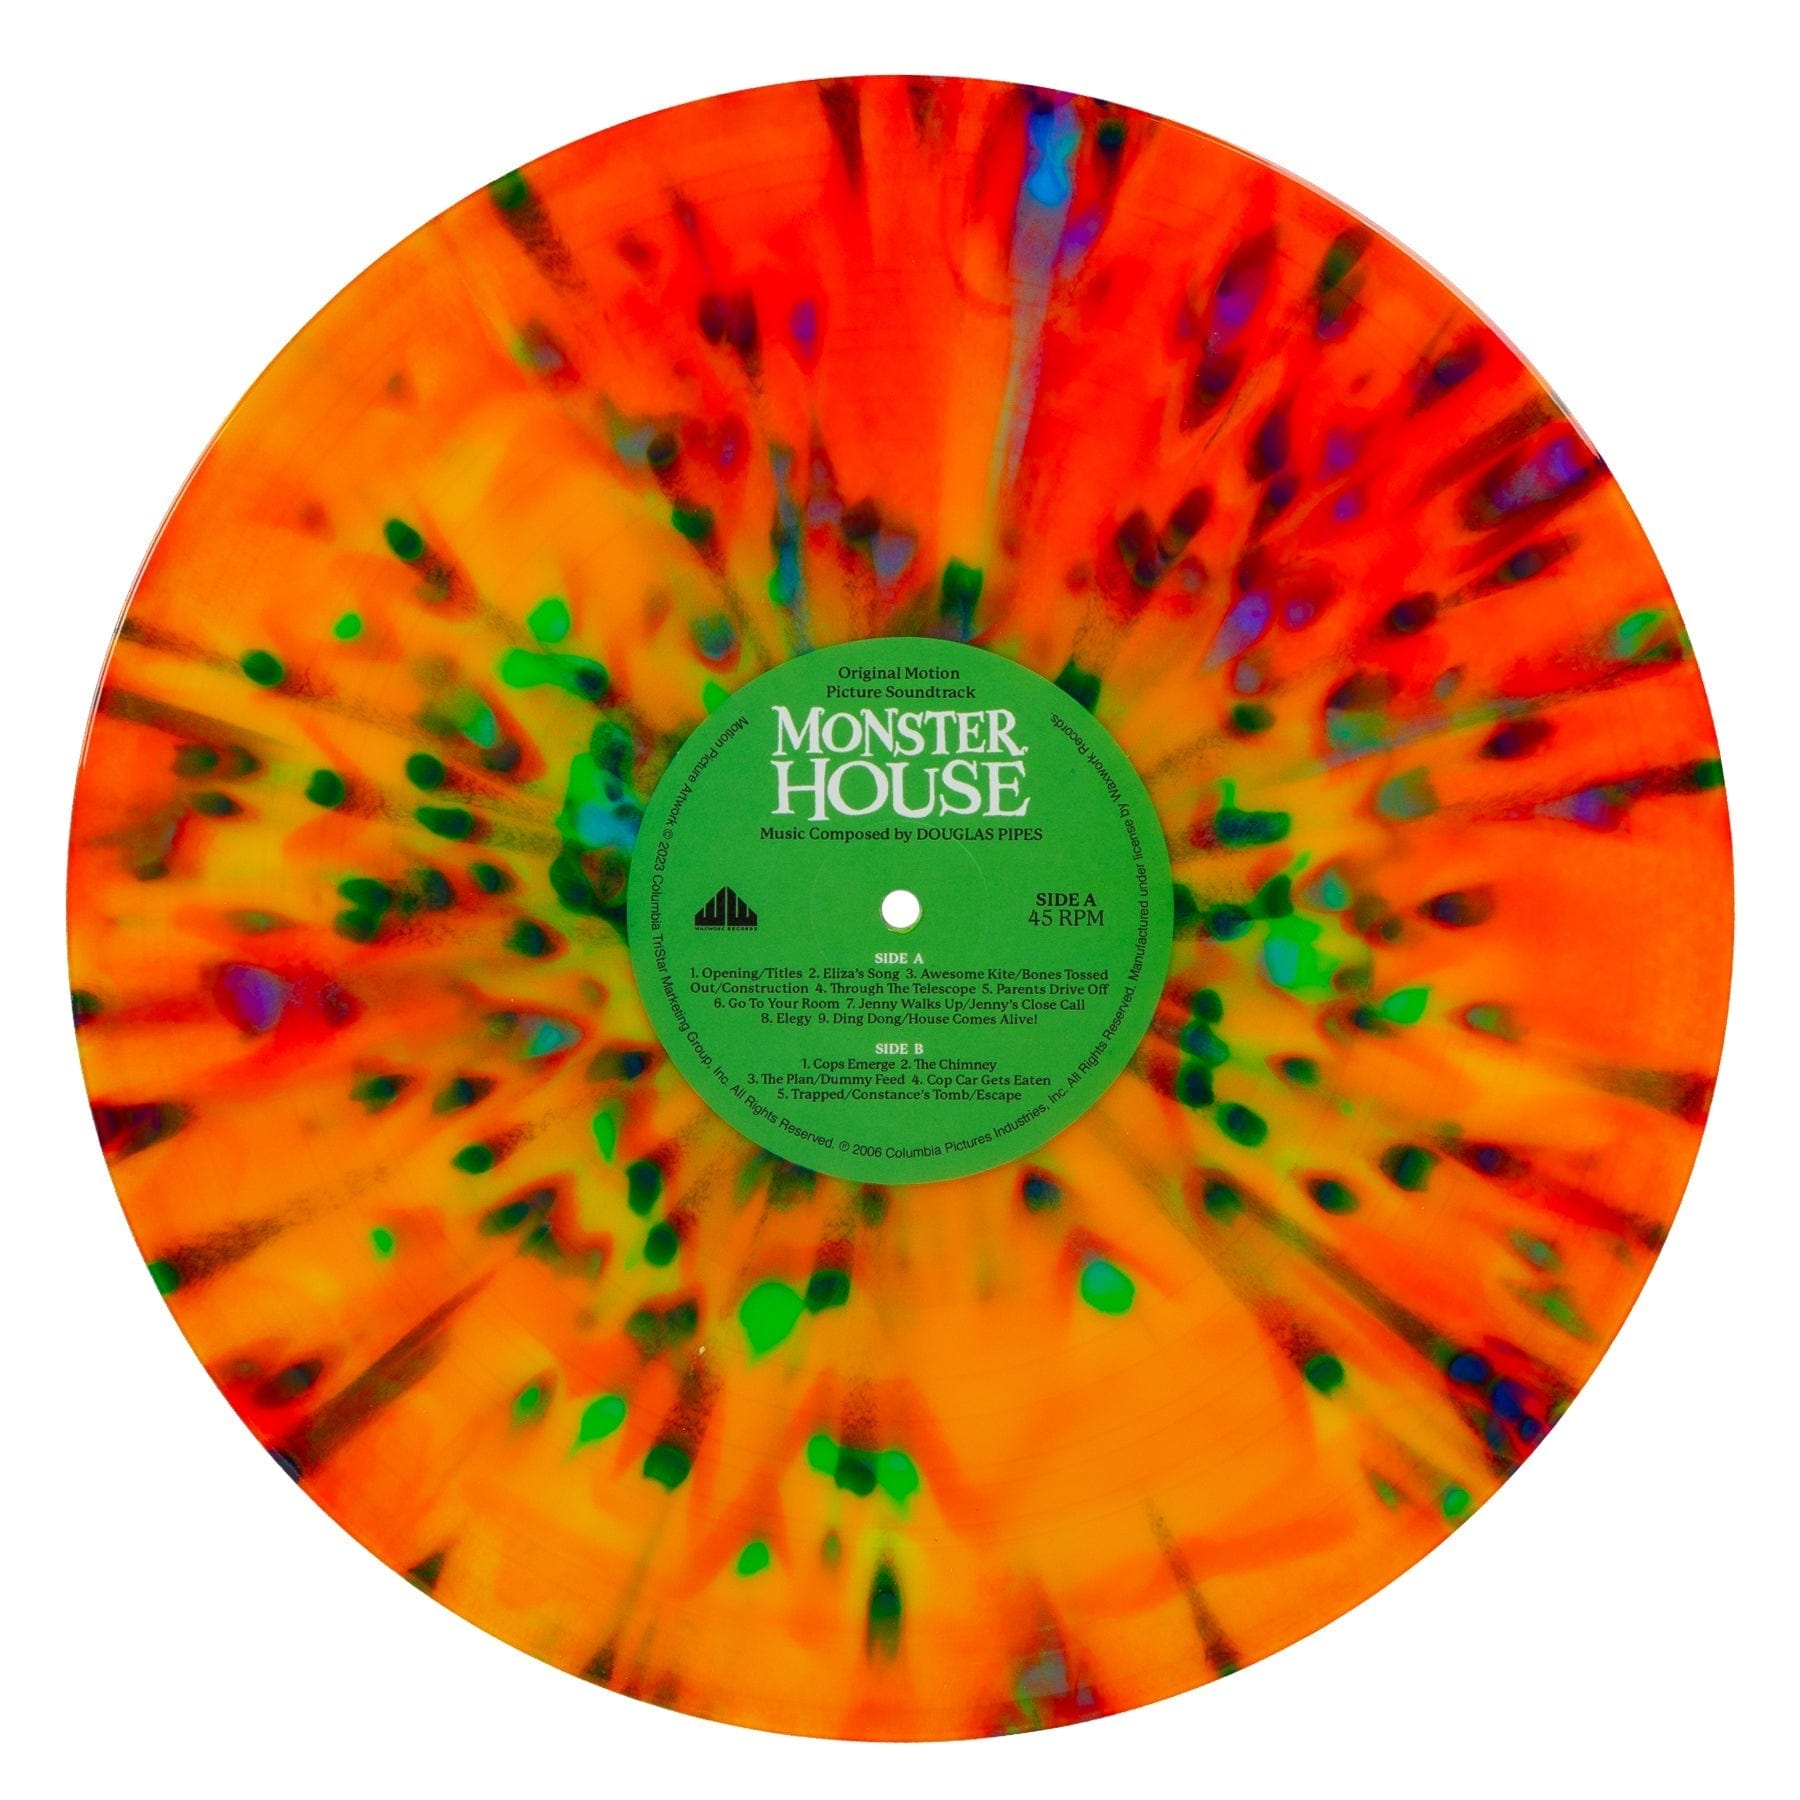 Stranger Things 4 soundtrack -  Exclusive : r/VinylReleases